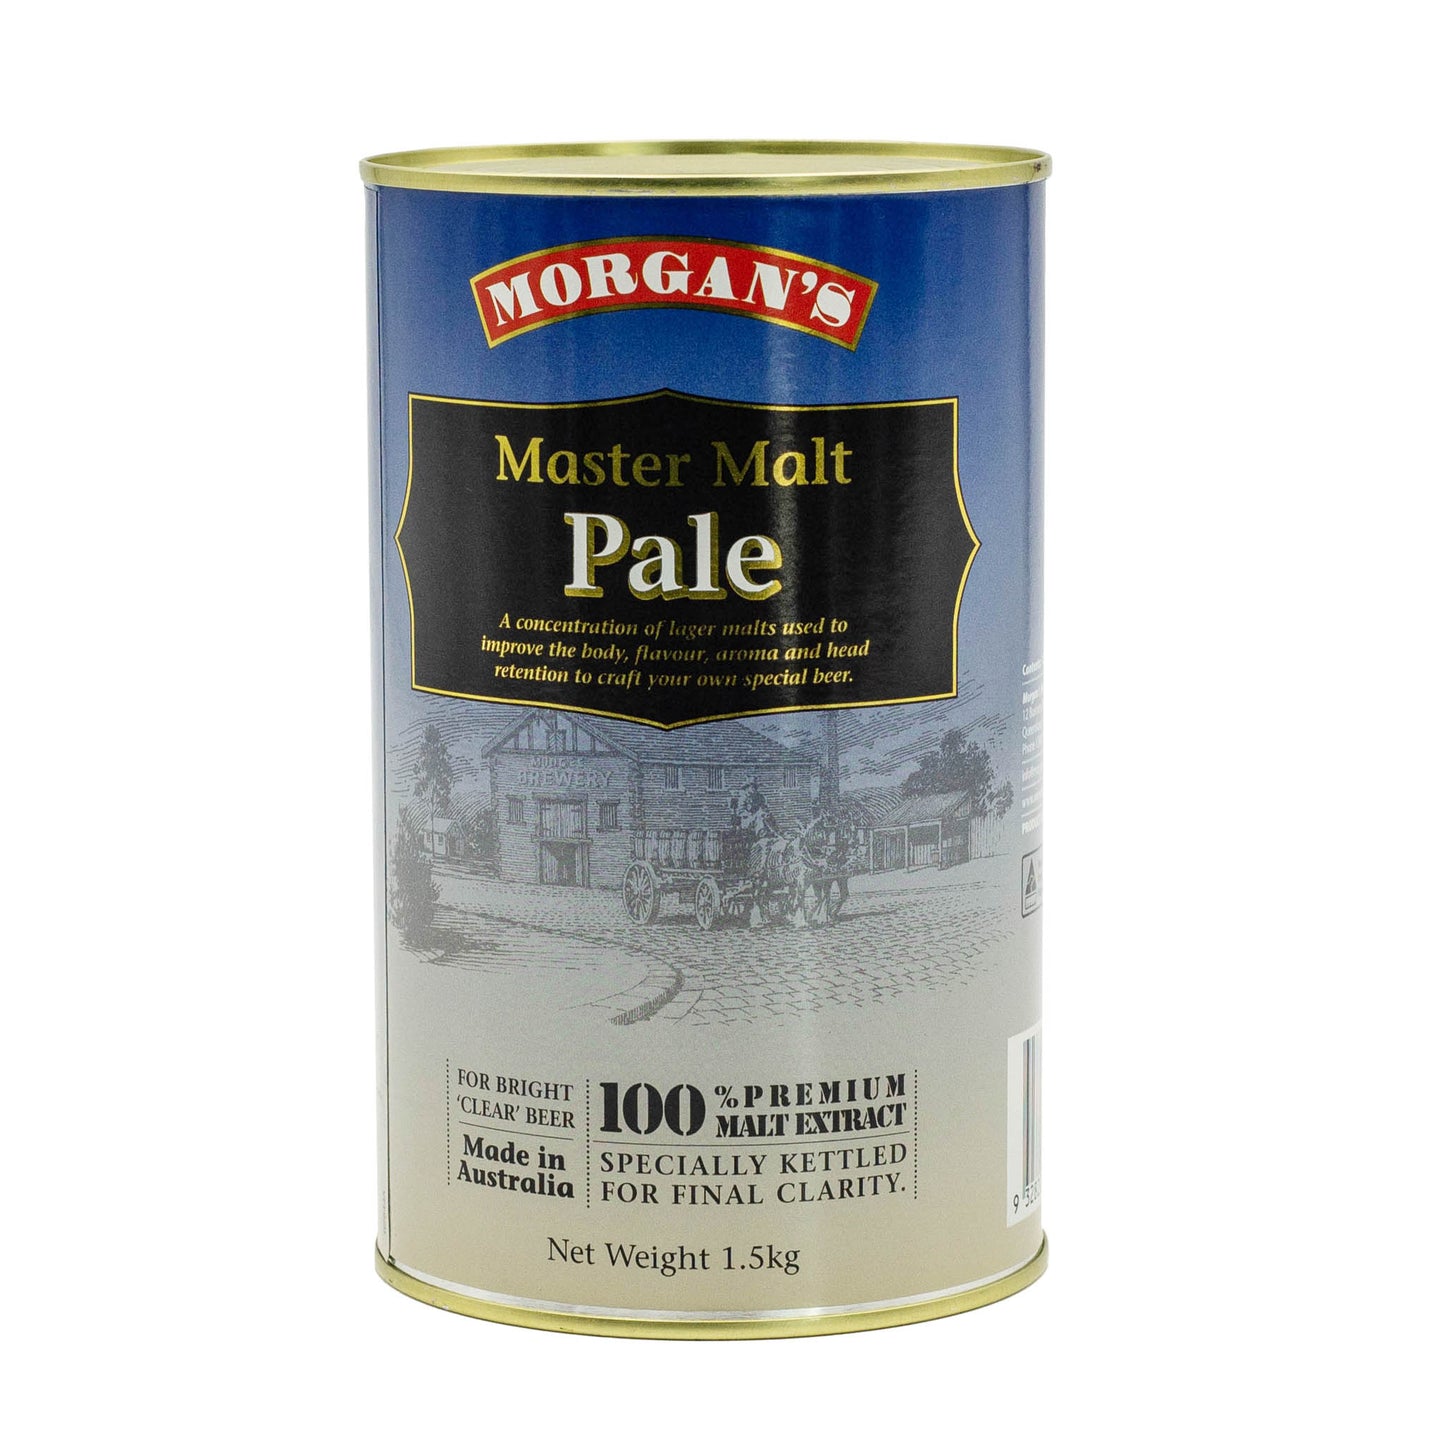 Morgans Master Malt Pale brew tin for a Grainy Candy flavour and aroma.